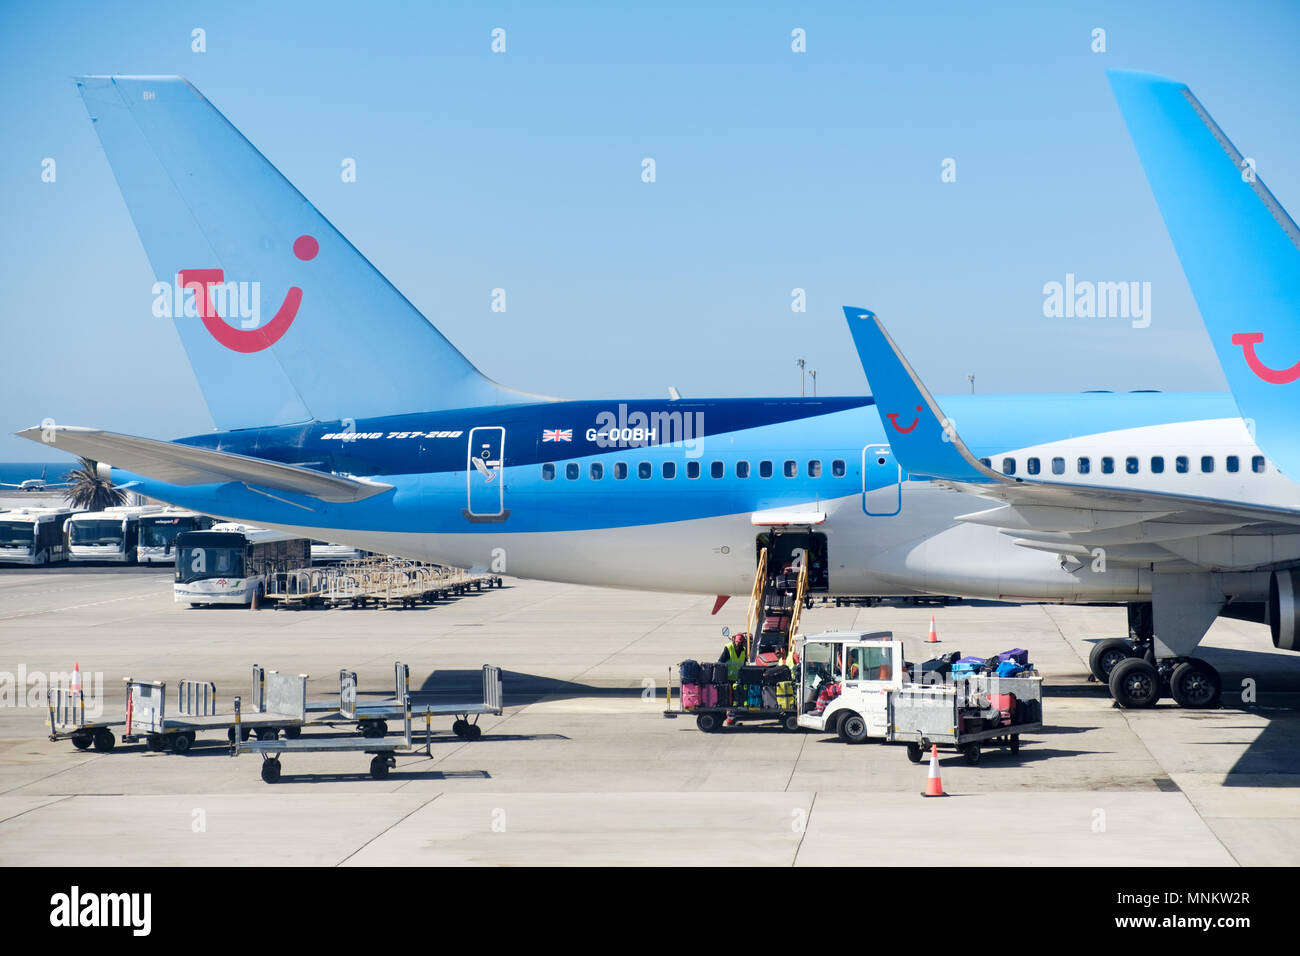 TUI Boeing aircraft on the apron of a busy airport . GSE are servicing a plane. The planes clearly display the TUI logo and on the planes tail Stock Photo